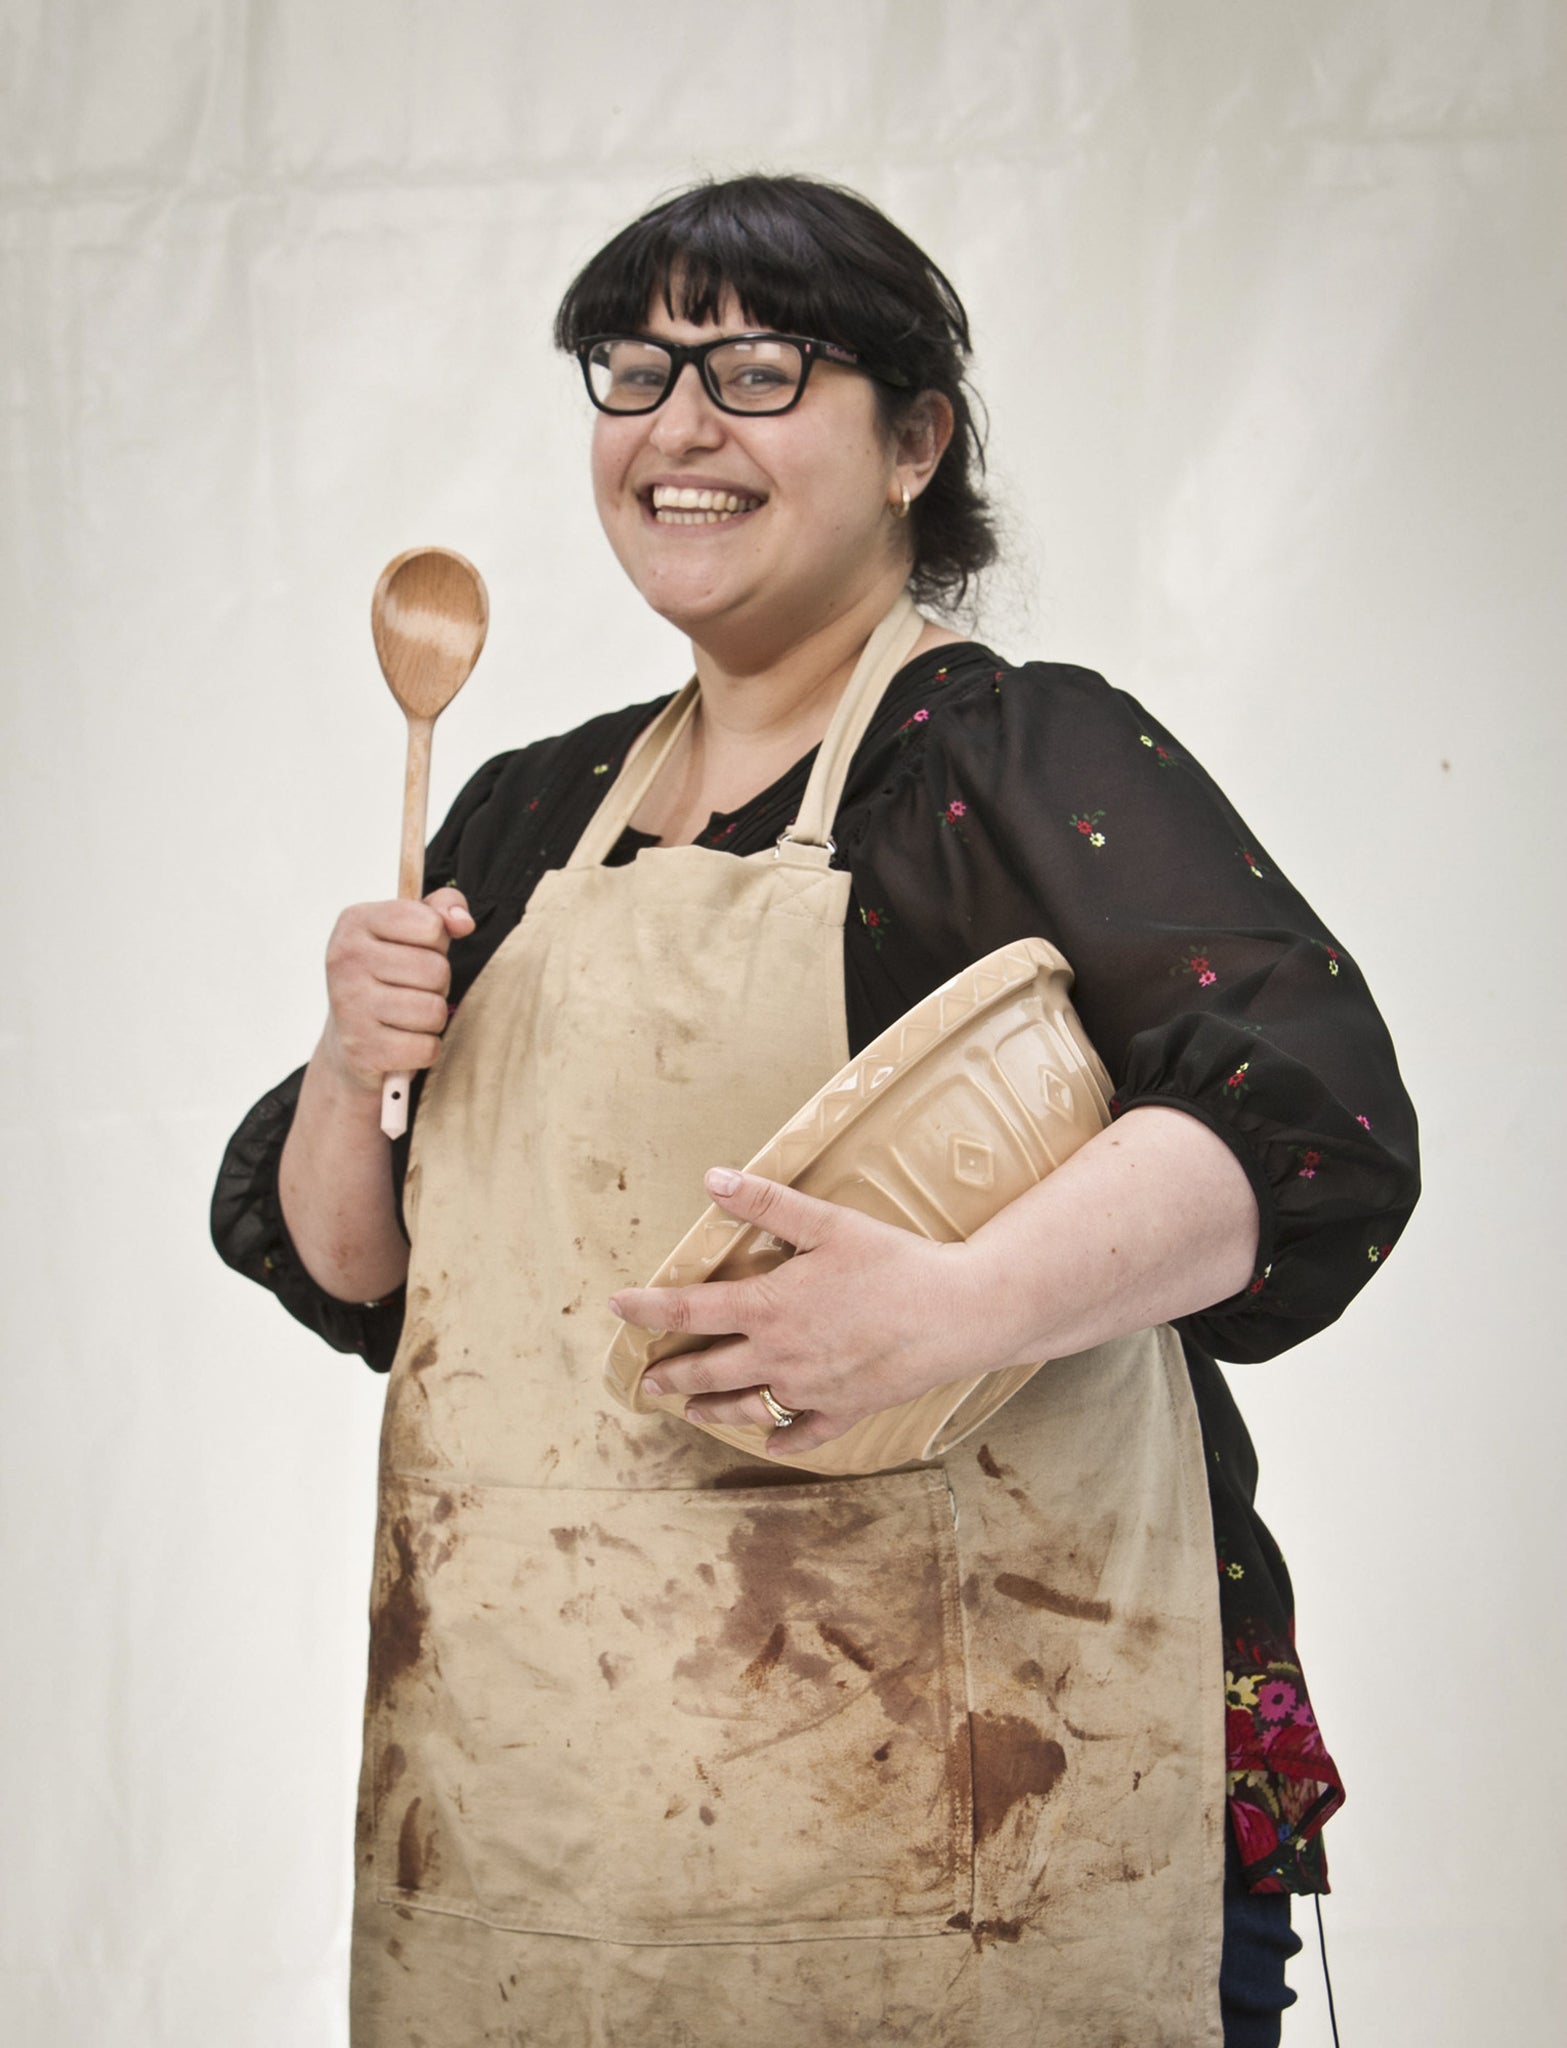 Claire from the Great British Bake Off 2014